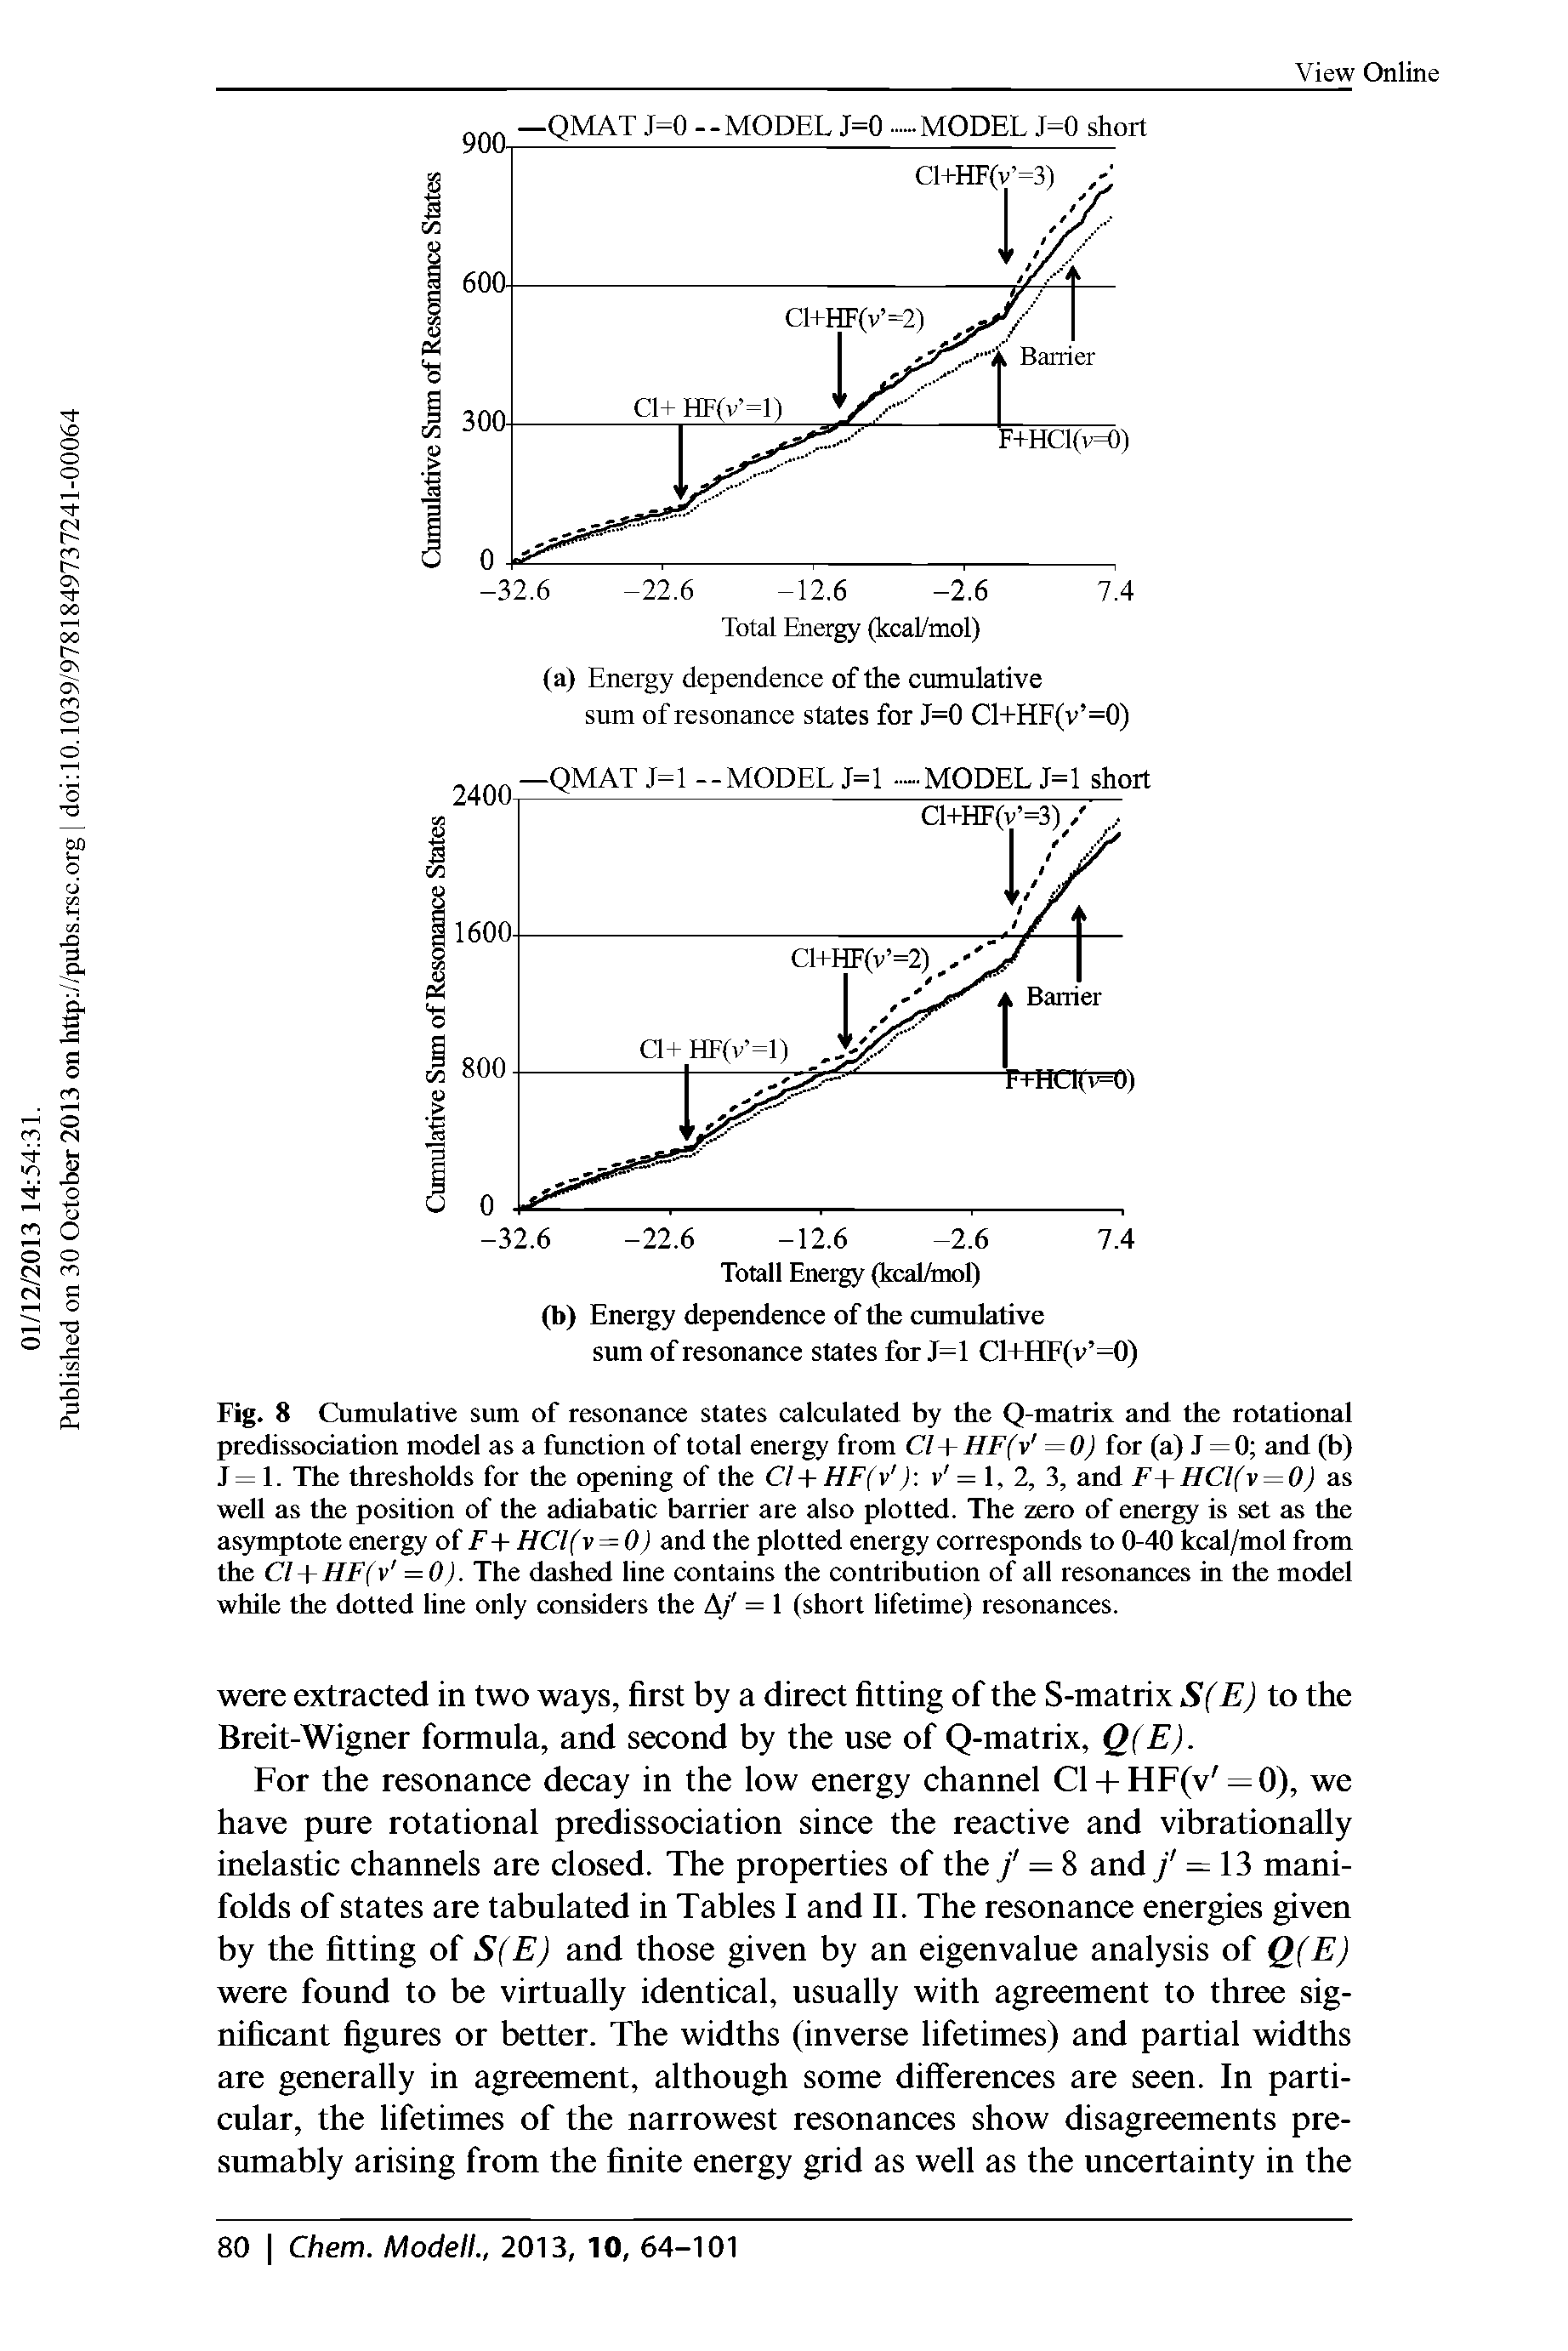 Fig. 8 Cumulative sum of resonance states calculated by the Q-matrix and the rotational predissociation model as a function of total energy from Cl + HF(v =0) for (a) J = 0 and (b) J= 1. The thresholds for the opening of the Cl+ HF(v ) r = 1, 2, 3, and F+HCl(v = 0) as well as the position of the adiabatic barrier are also plotted. The zero of energy is set as the asymptote energy of E + HCl(v = 0) and the plotted energy corresponds to 0-40 kcal/mol from the Cl + HF(v = 0). The dashed line contains the contribution of all resonances in the model while the dotted line only considers the A/ = 1 (short lifetime) resonances.